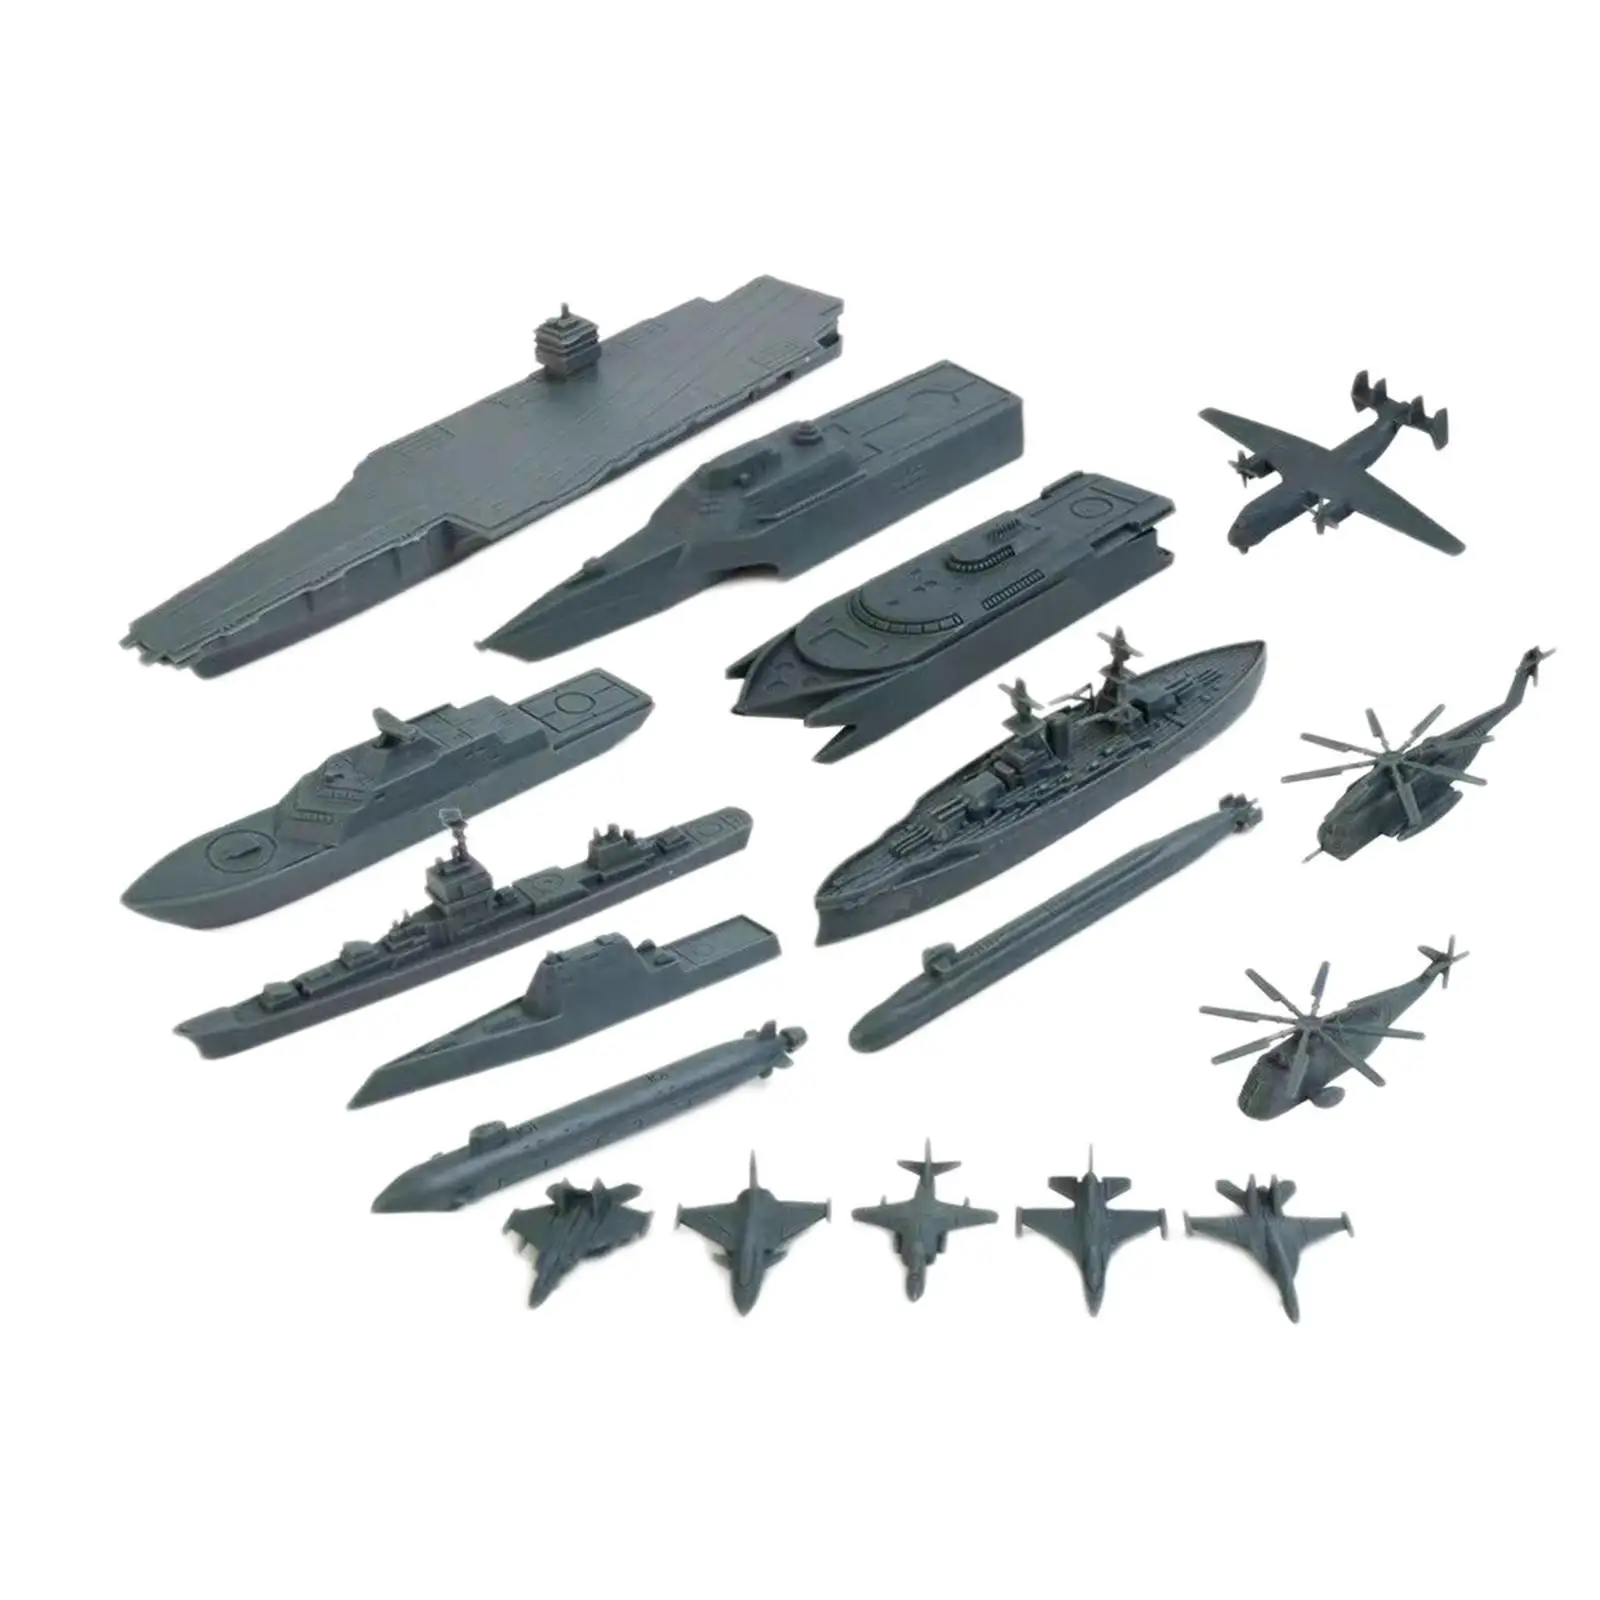 17 Pieces Naval Ship Building Blocks Ship Model Toy Kit with Small Scale Model Planes for Kids 14 Year and up Boys Girls Adult